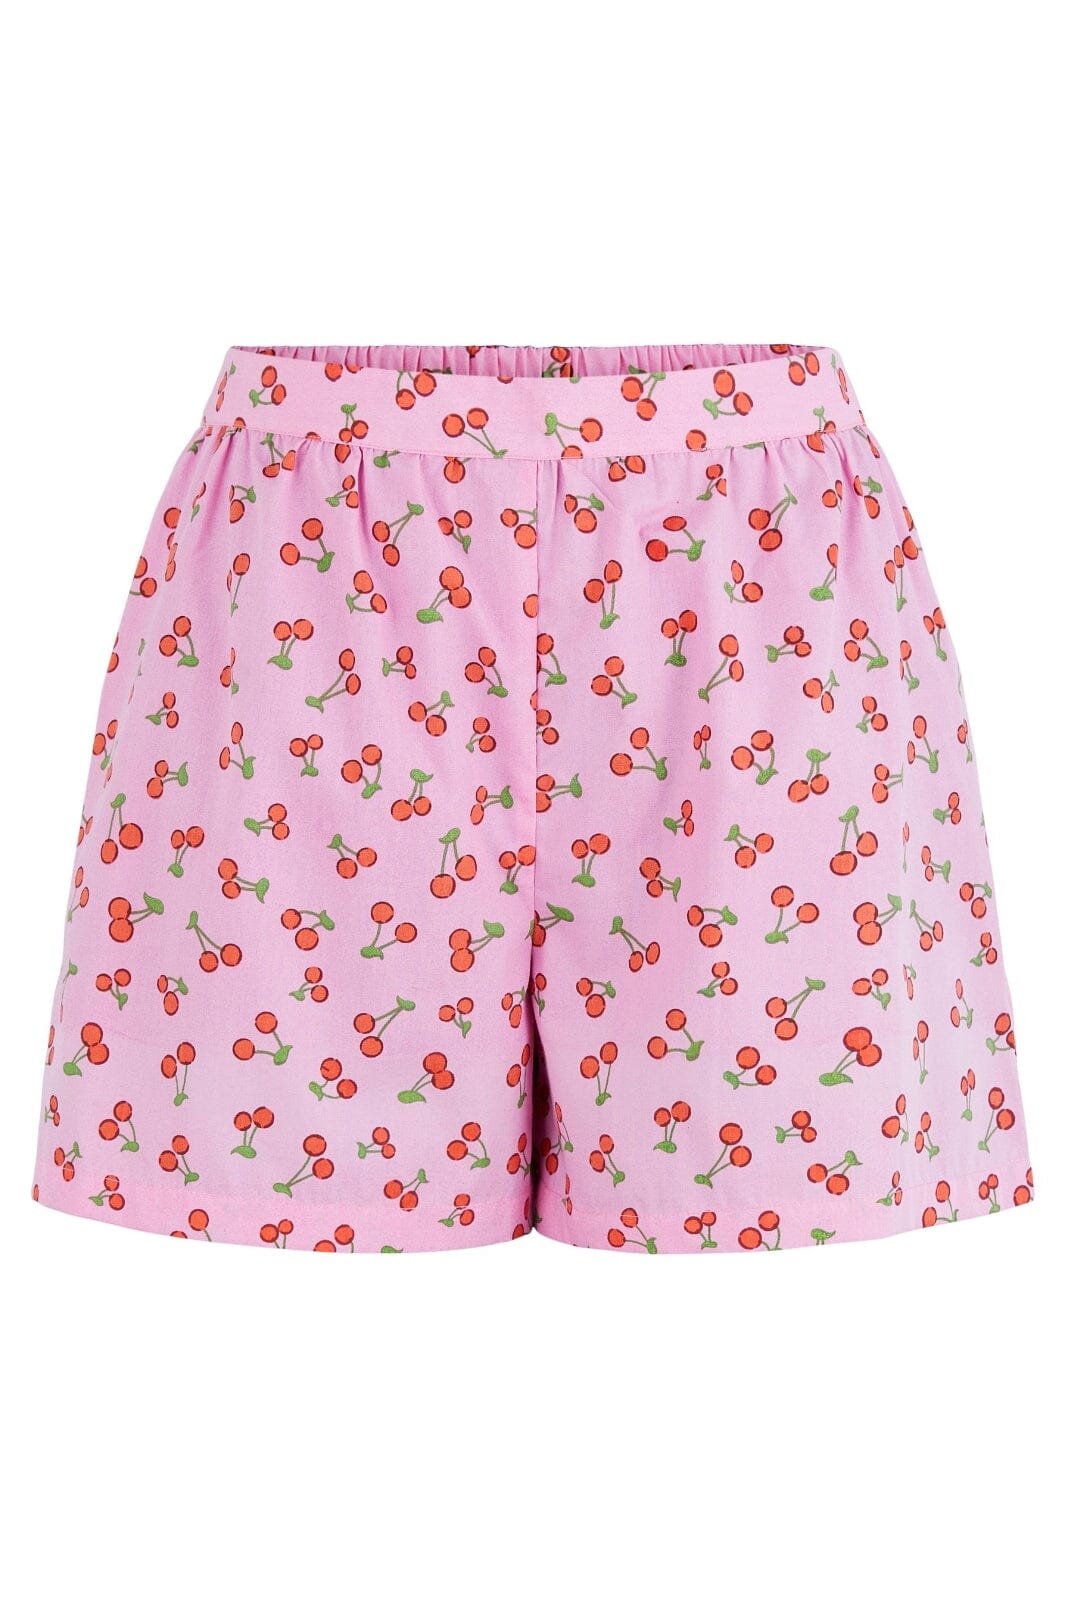 Pieces - Pcberry Shorts - Prism Pink Cherries Shorts 